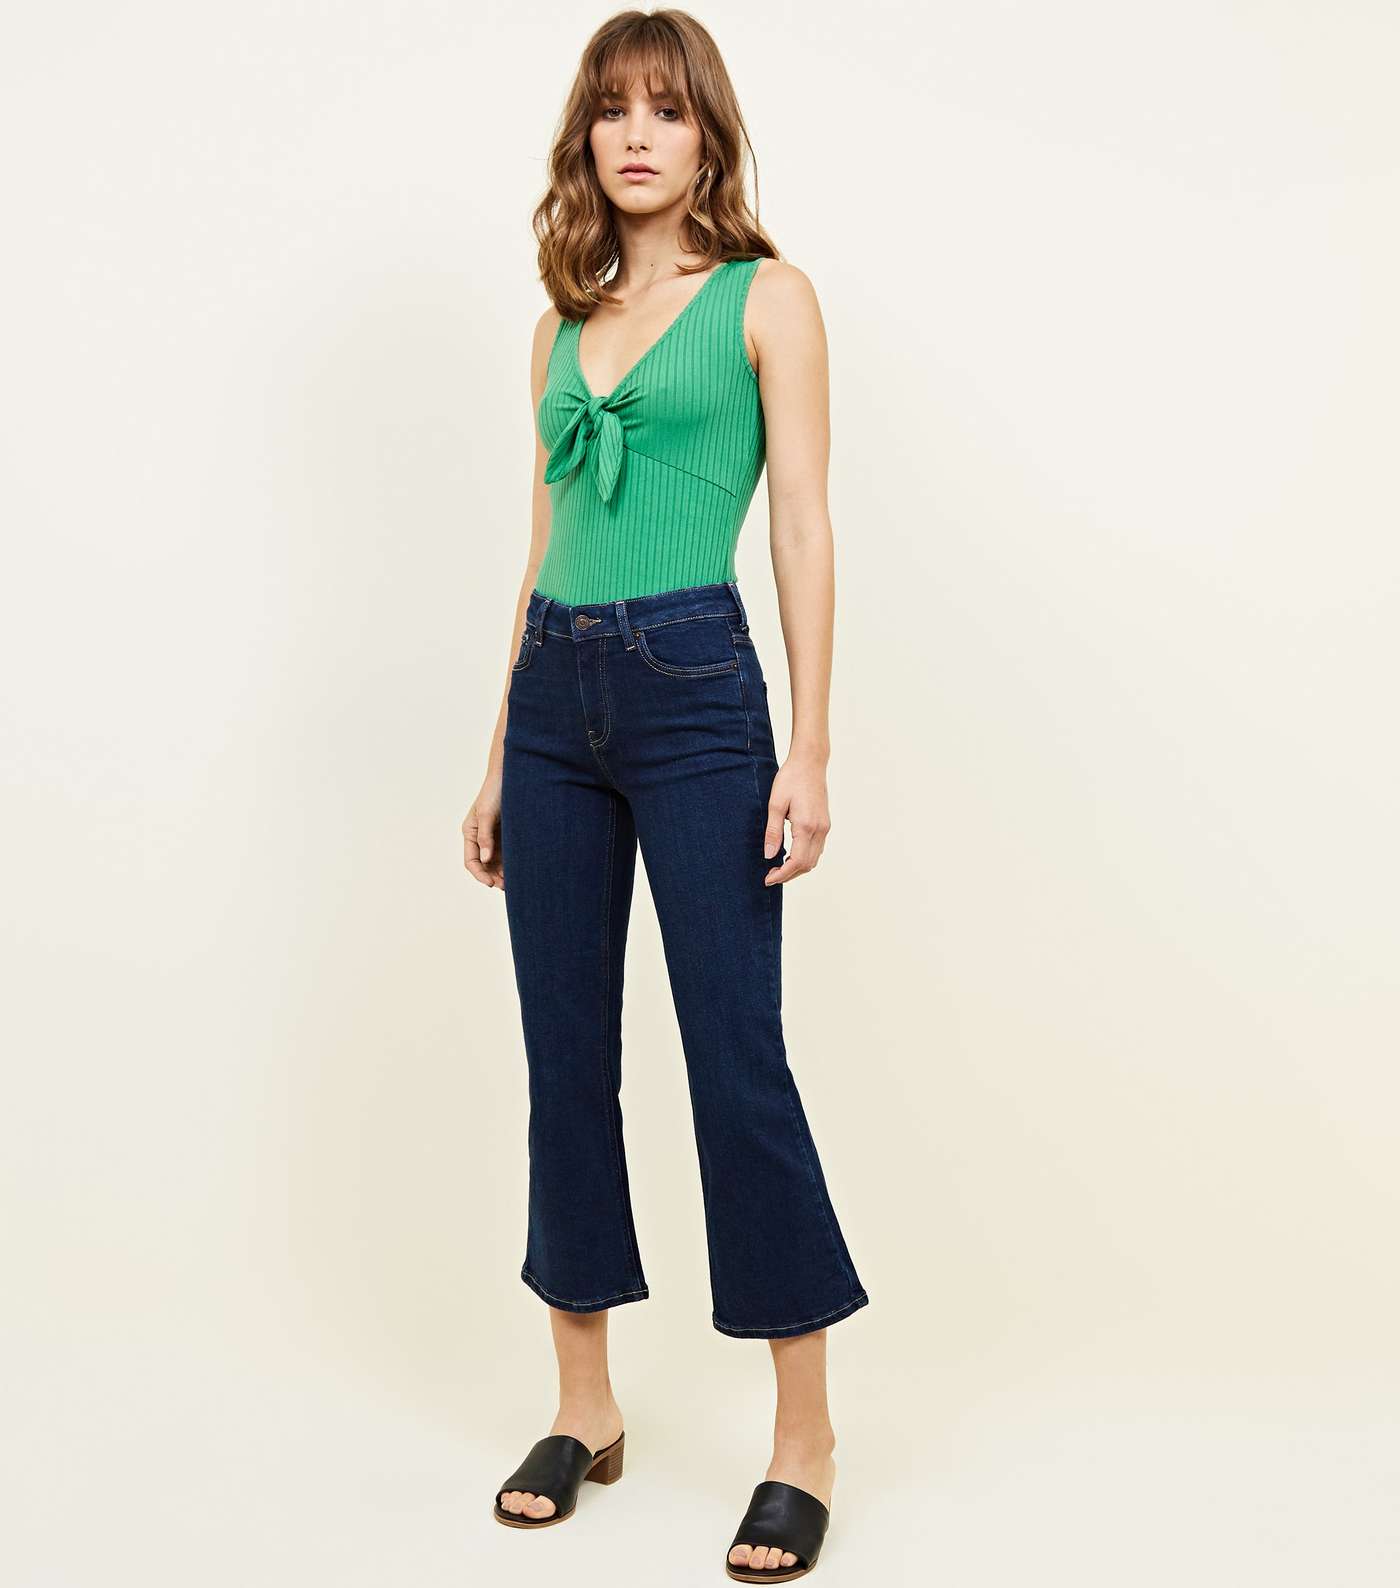 Green Ribbed Tie Front Sleeveless Bodysuit Image 2